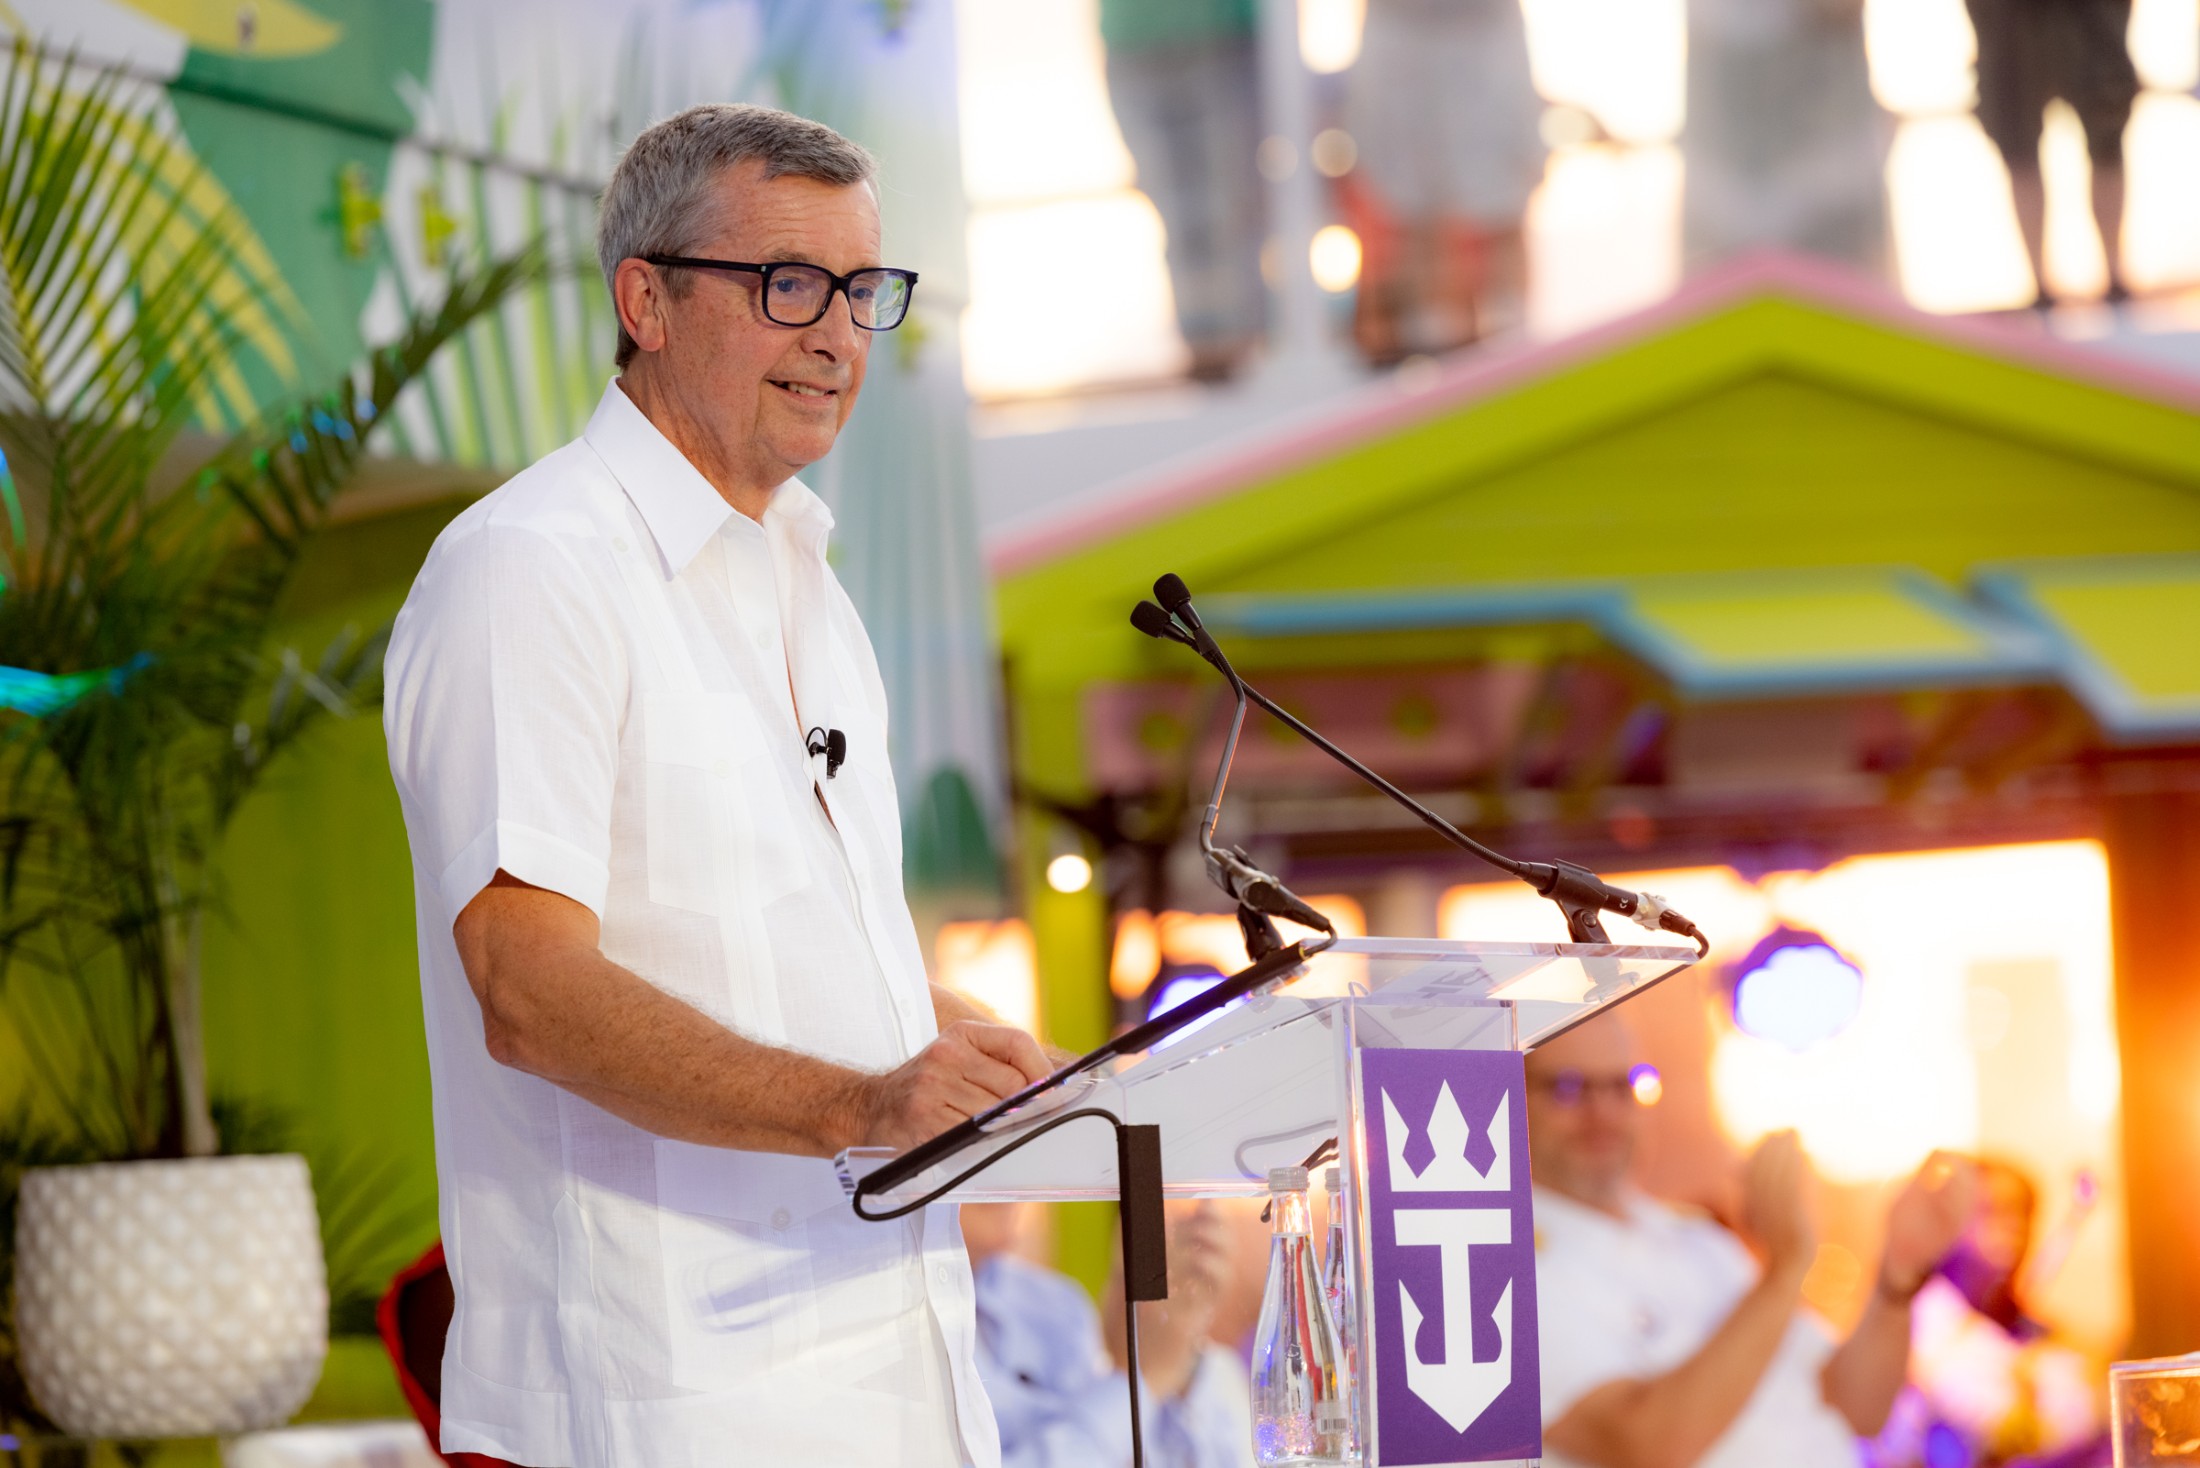 Royal Caribbean International’s President and CEO, Michael Bayley, speaks at the cruise line’s Caribbean-inspired naming ceremony for new, game-changing ship Odyssey of the Seas. The celebratory occasion took place at Port Everglades in Fort Lauderdale, Florida on Saturday, Nov. 13.